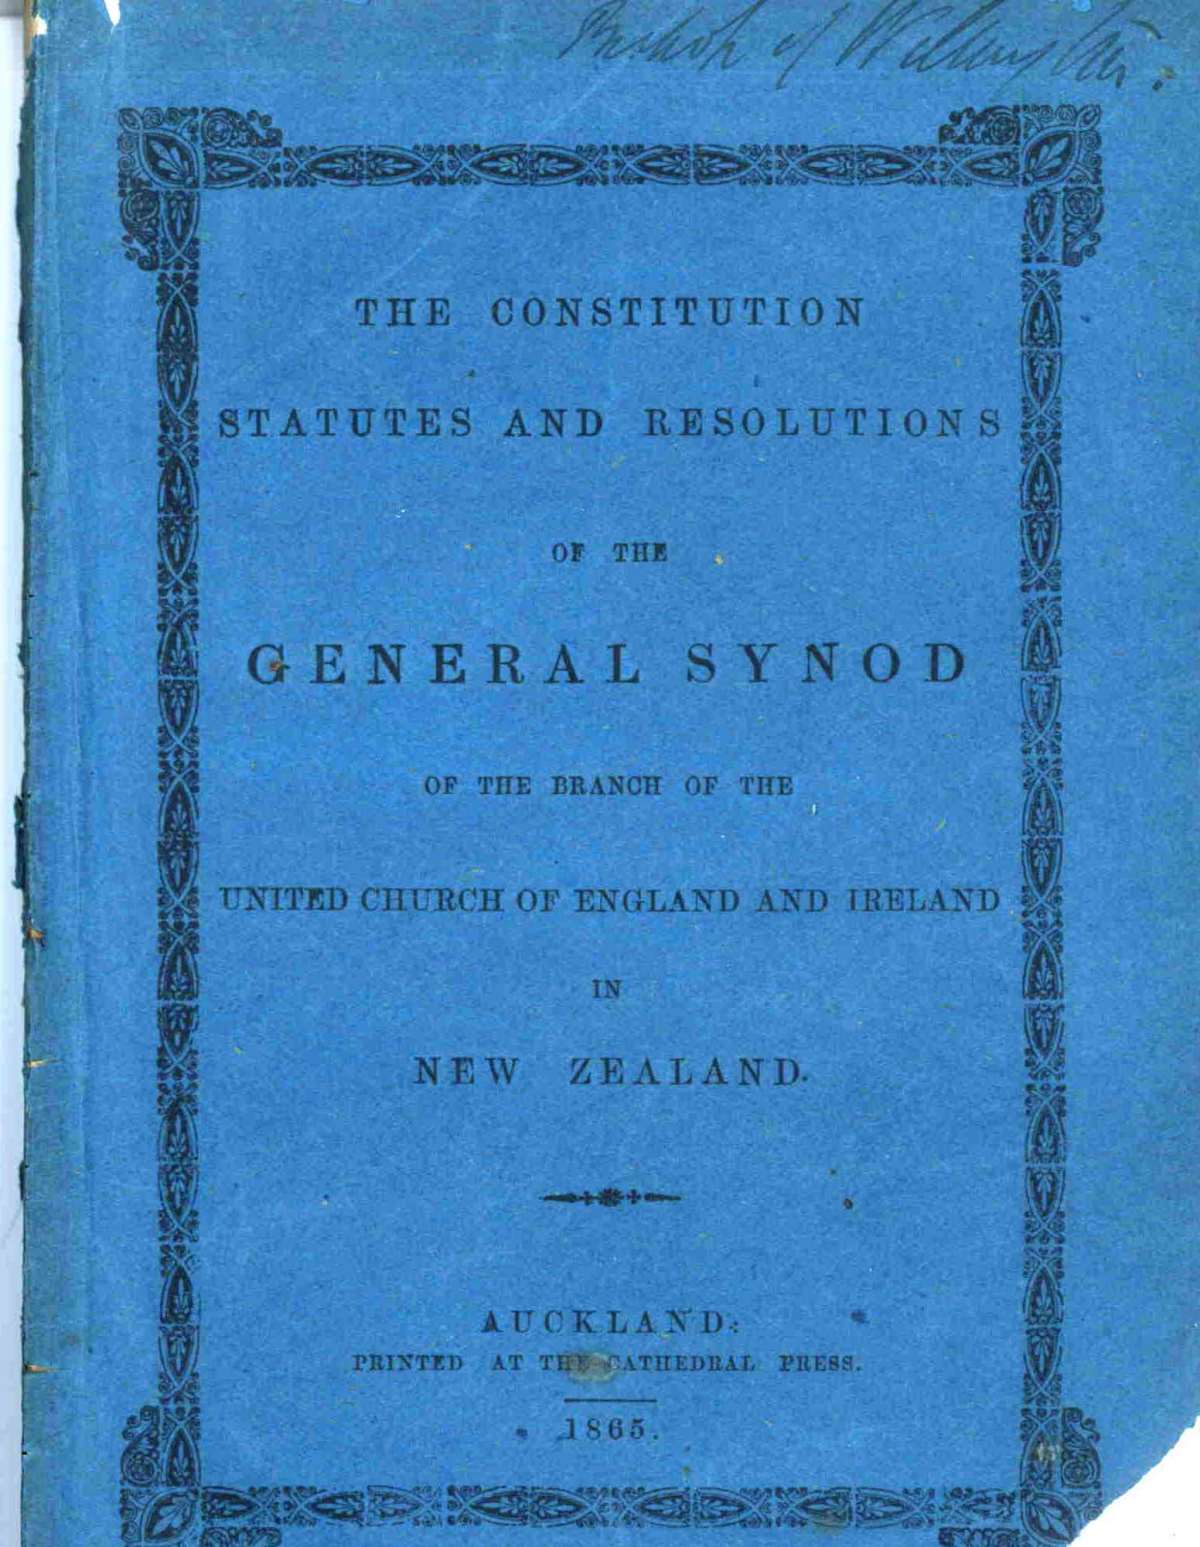 Front Cover for the General Synod proceedings in New Zealand